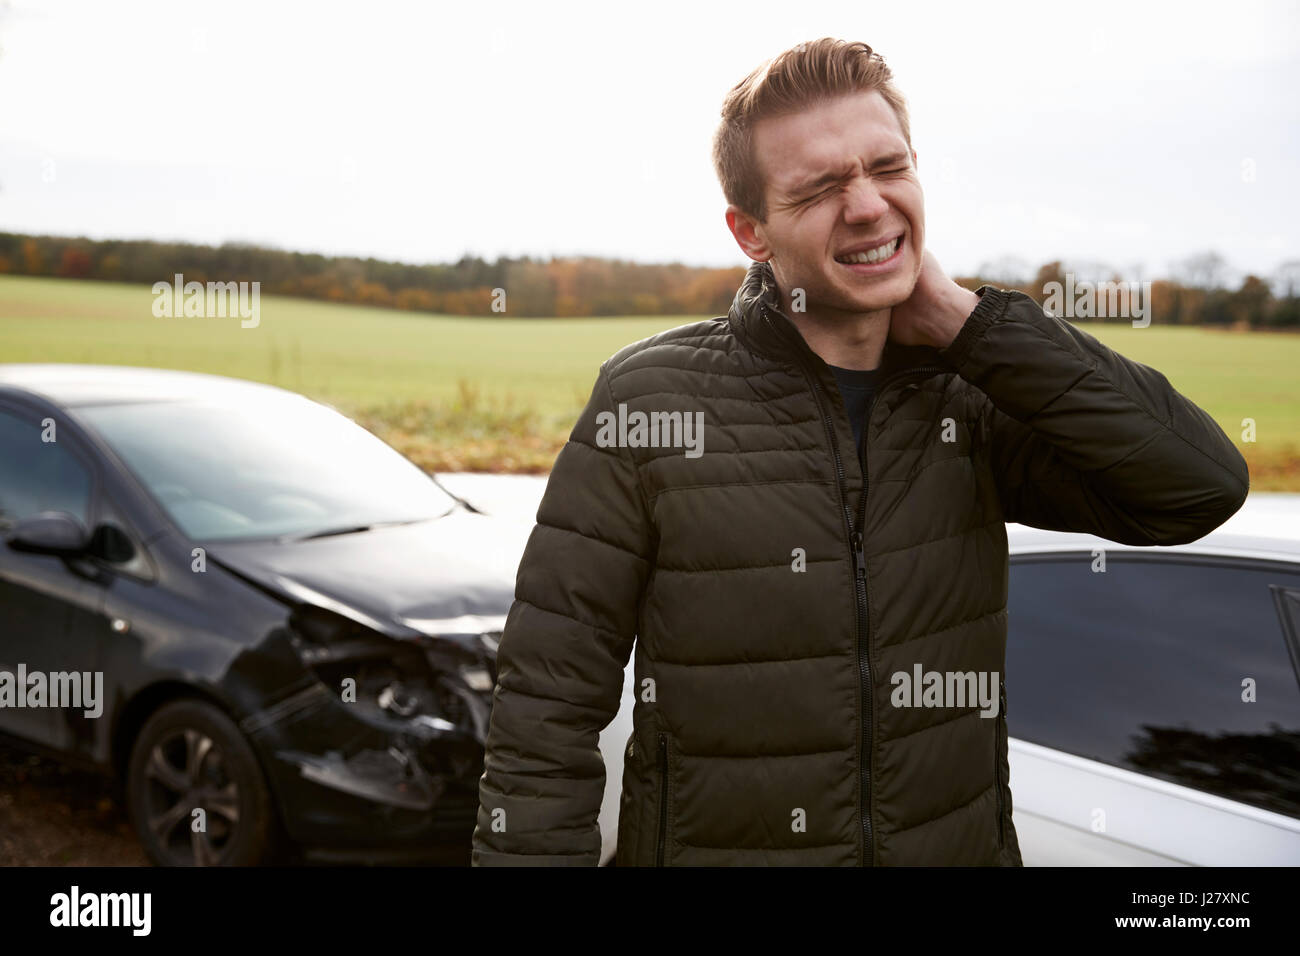 Man Suffering With Whiplash Injury After Car Accident Stock Photo